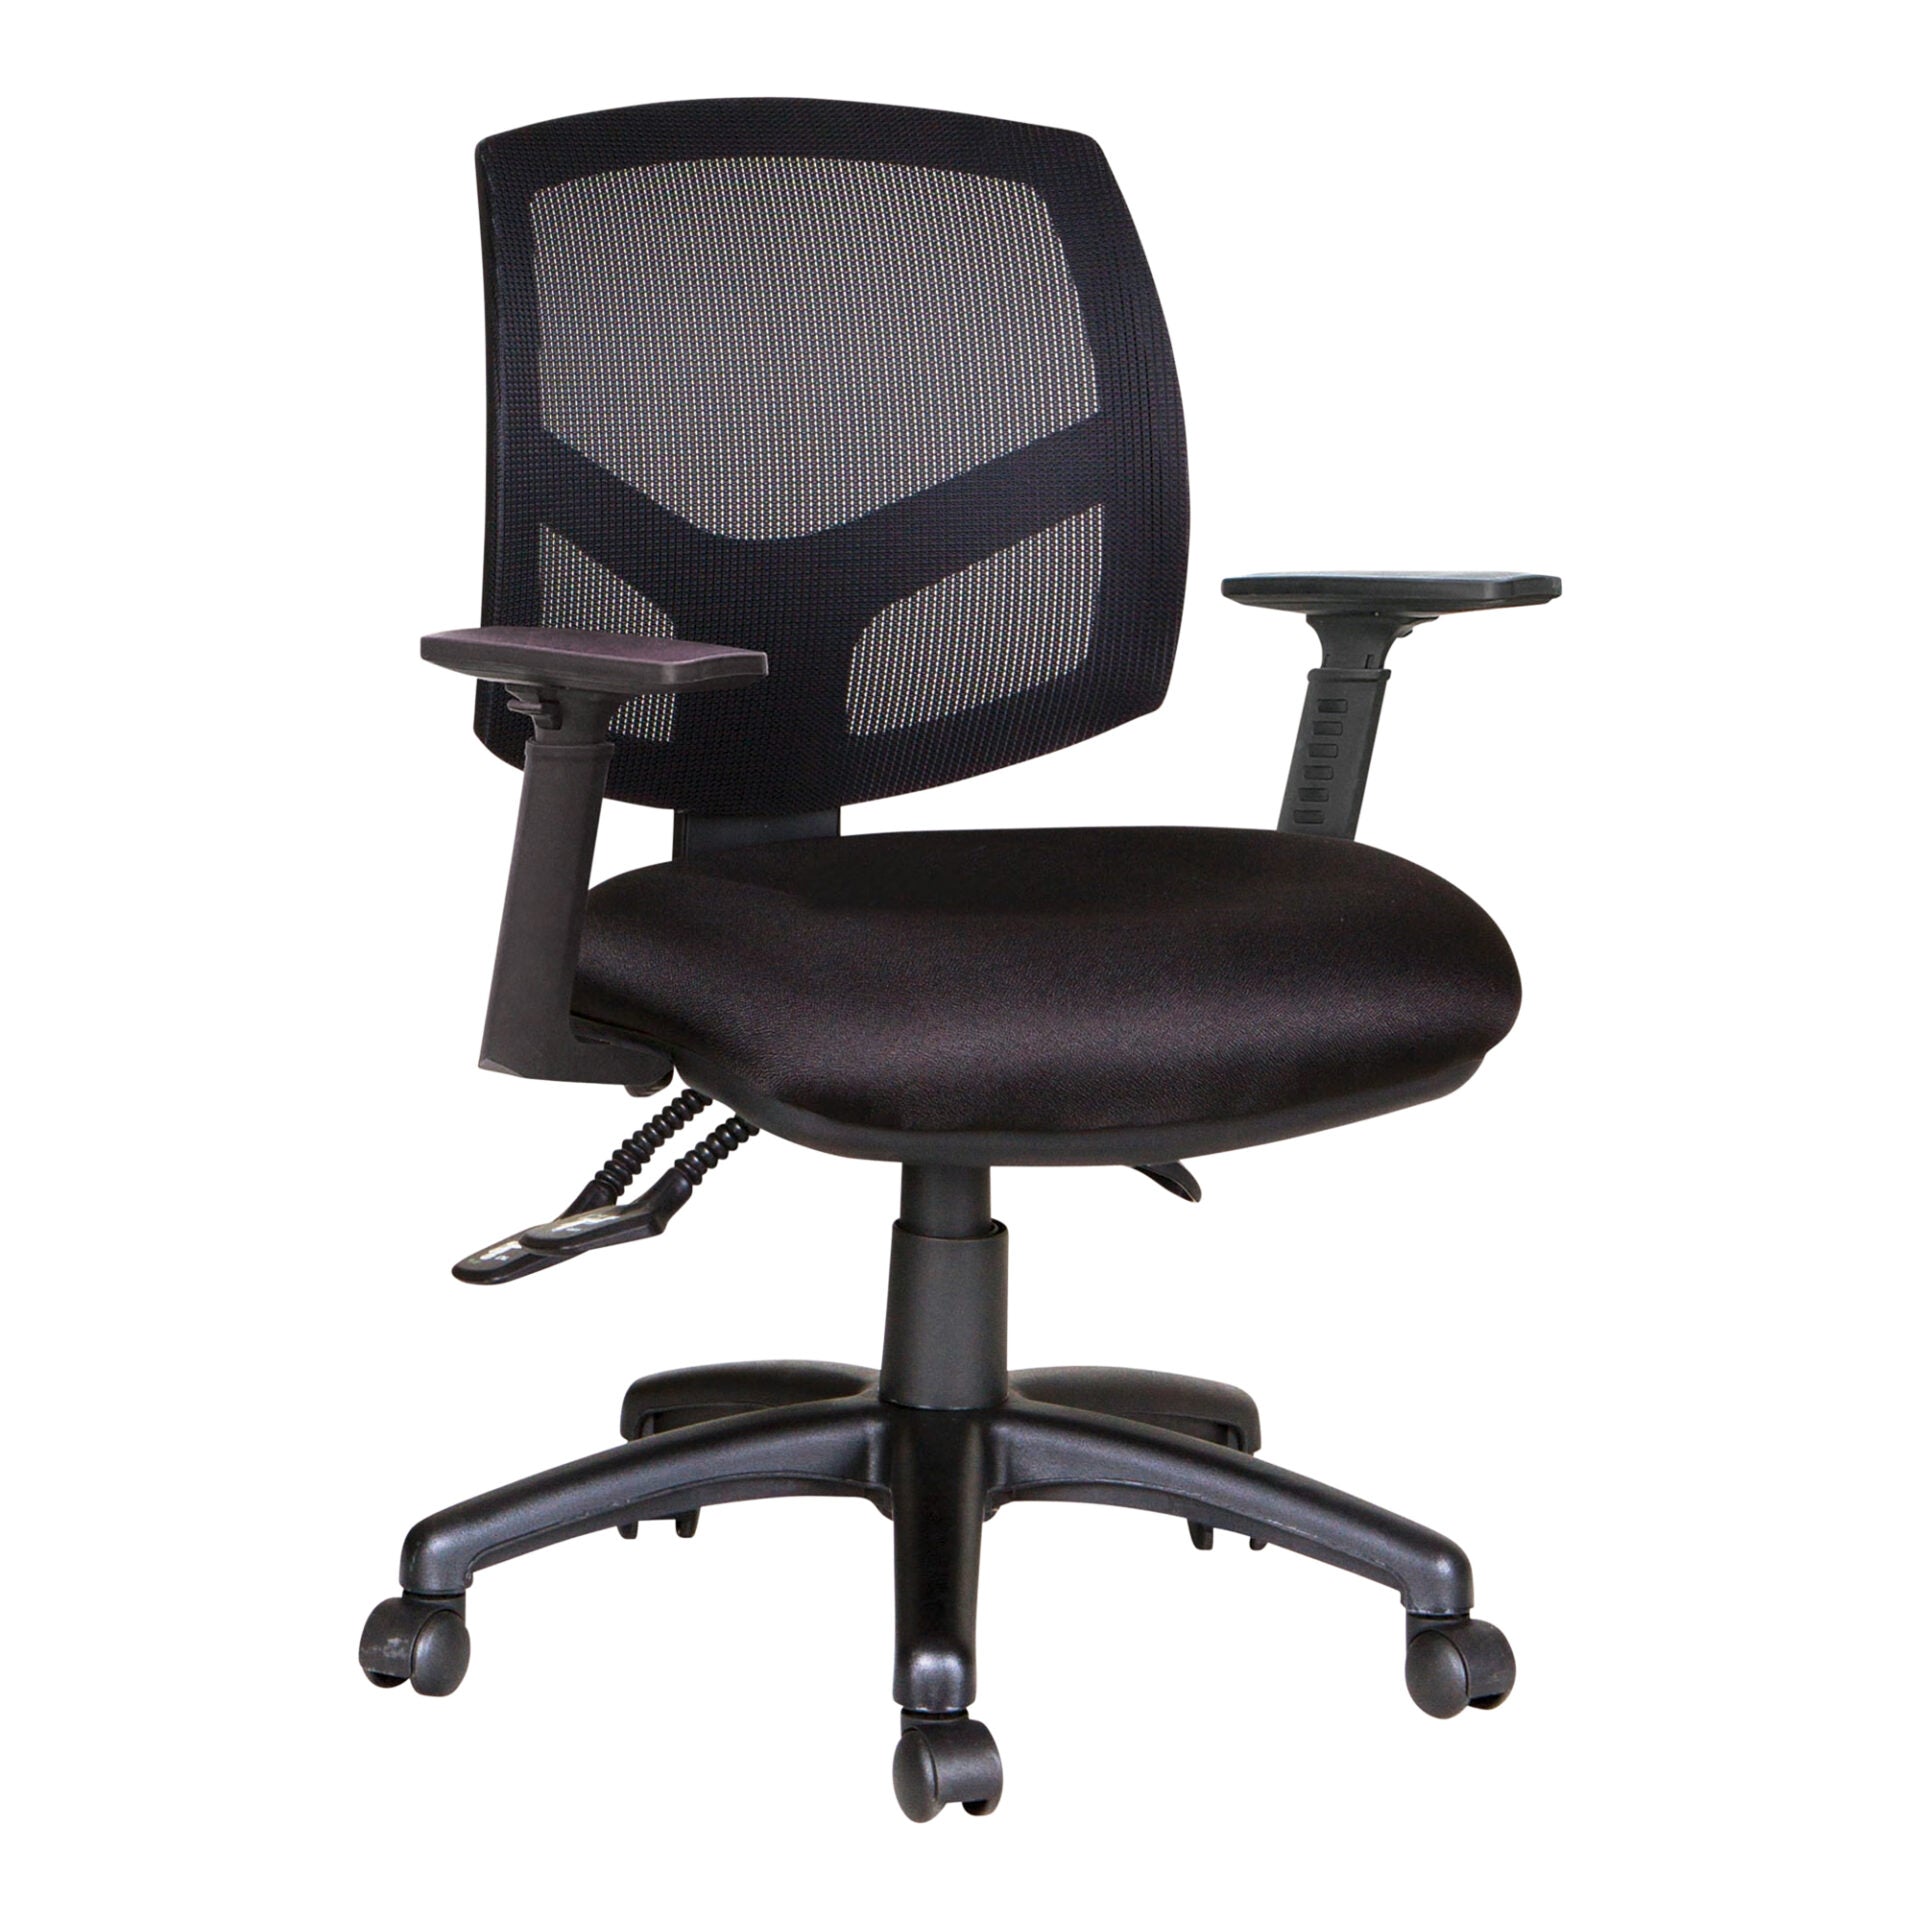 Mondo Java mesh-back office chair in black, front view, with height adjustable arms.